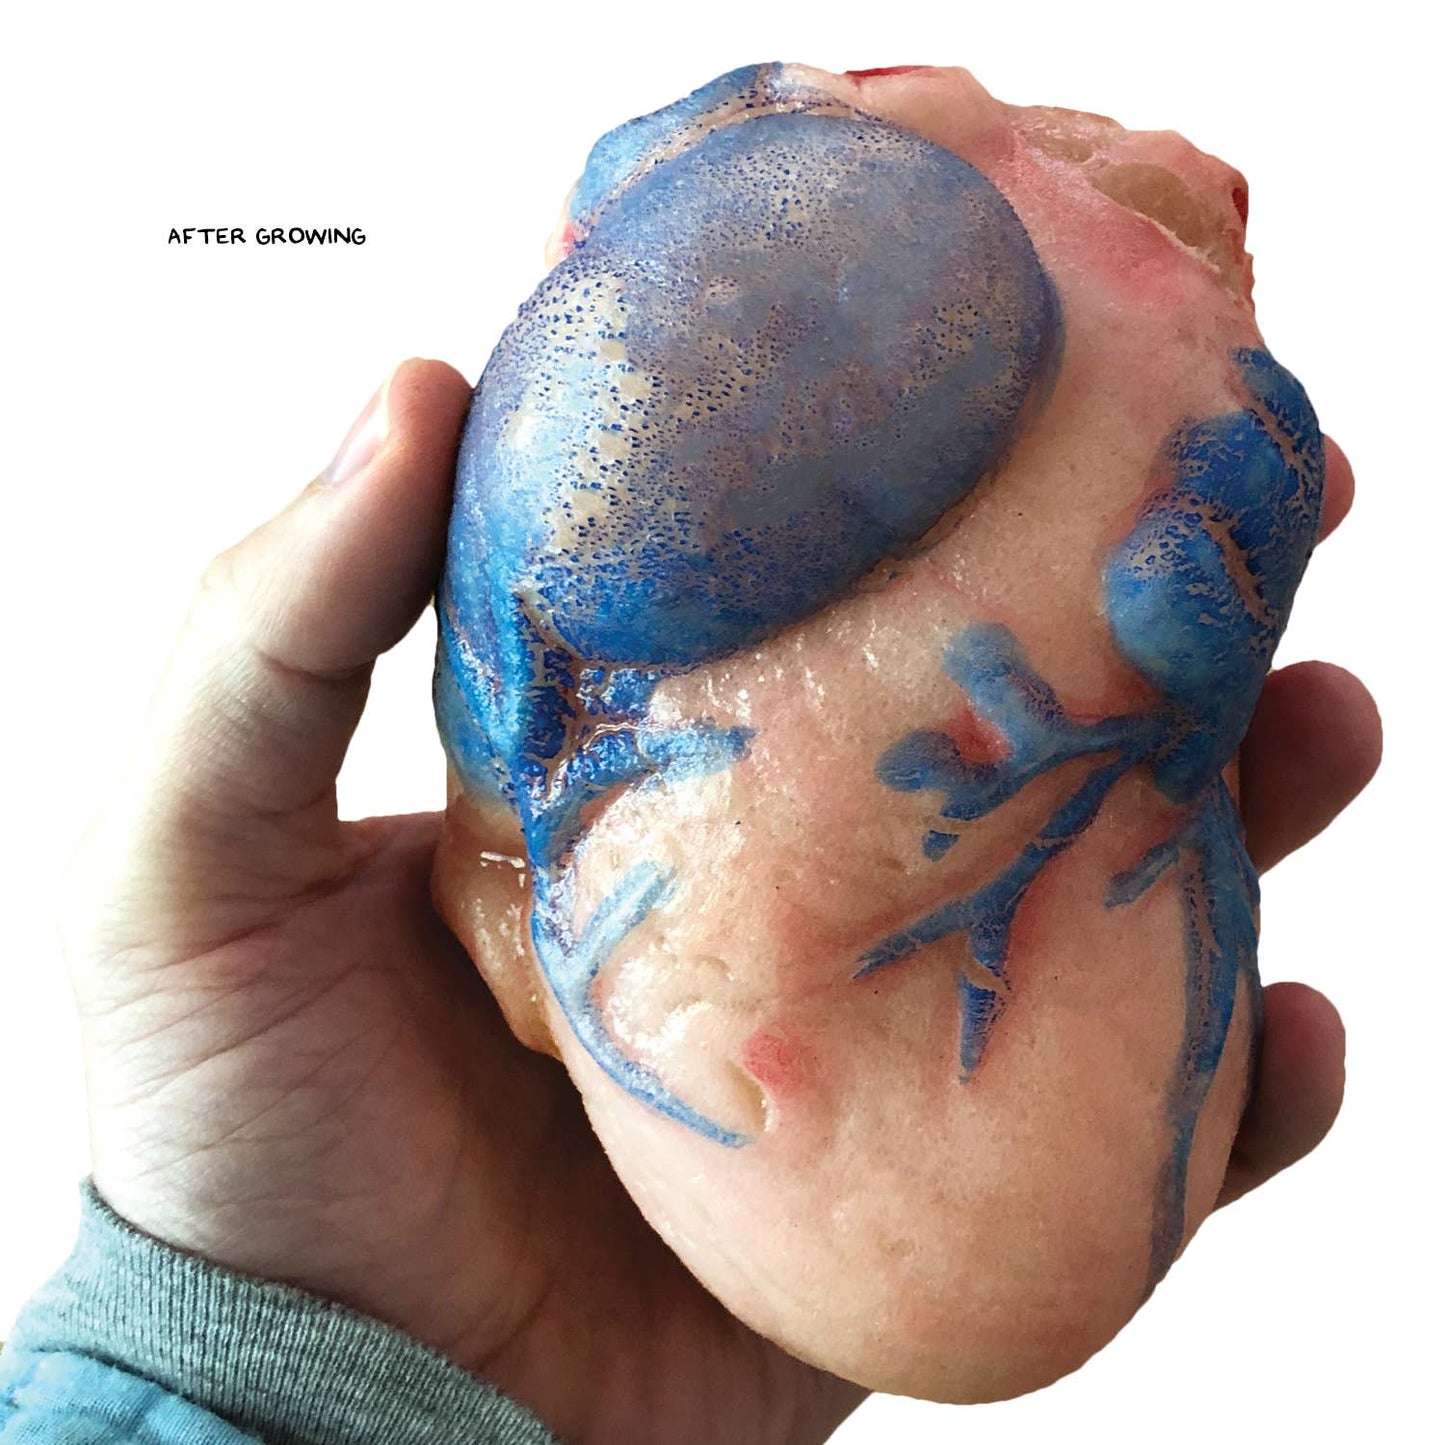 Extra Large Swell Polymer Heart